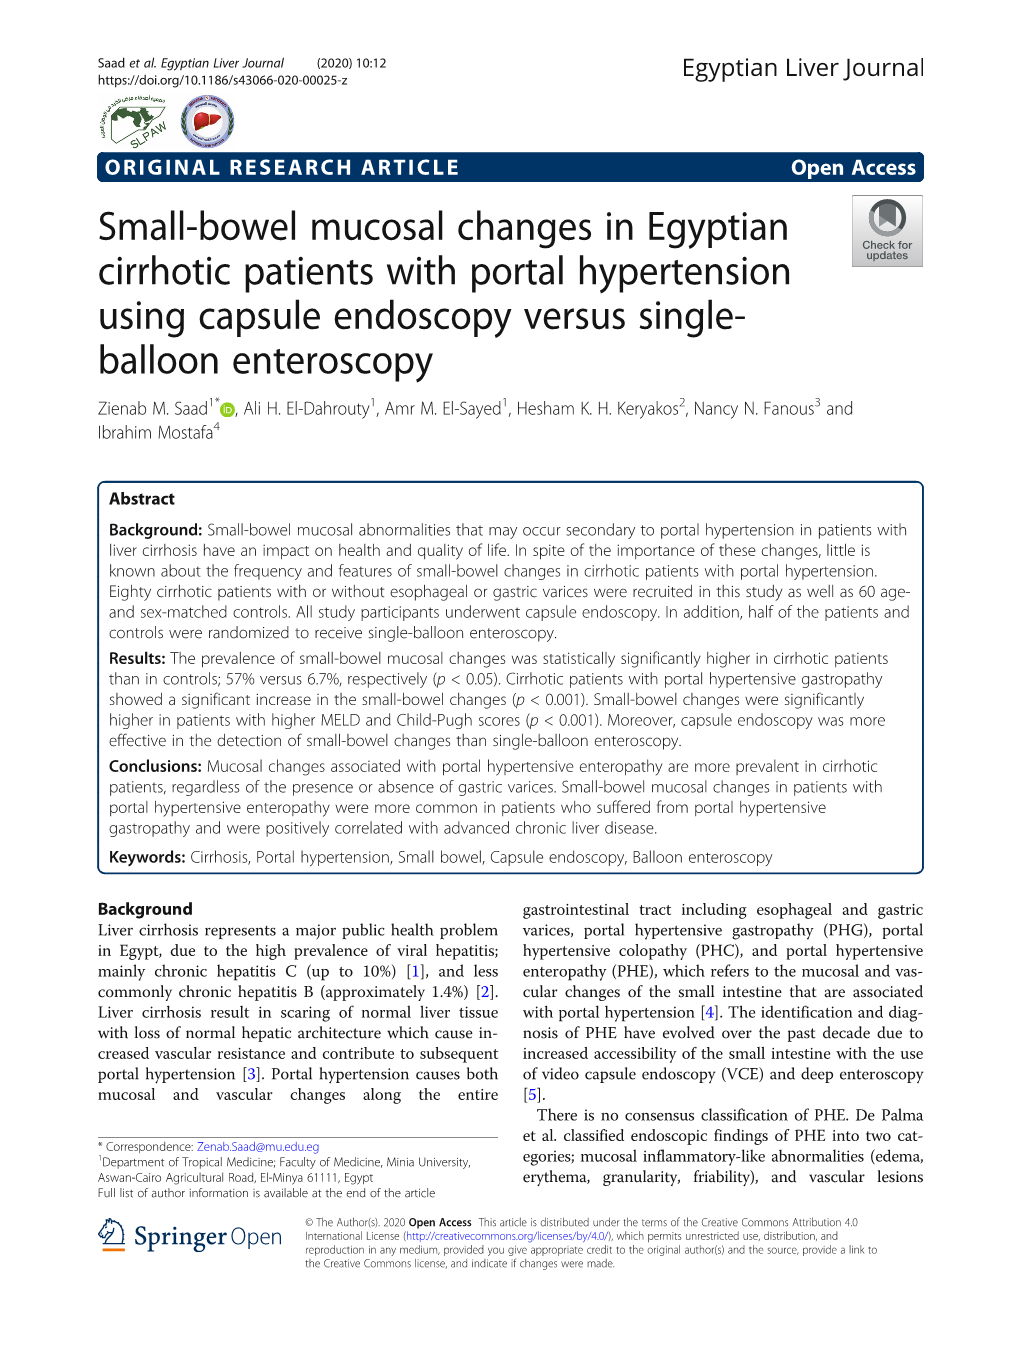 Small-Bowel Mucosal Changes in Egyptian Cirrhotic Patients with Portal Hypertension Using Capsule Endoscopy Versus Single- Balloon Enteroscopy Zienab M